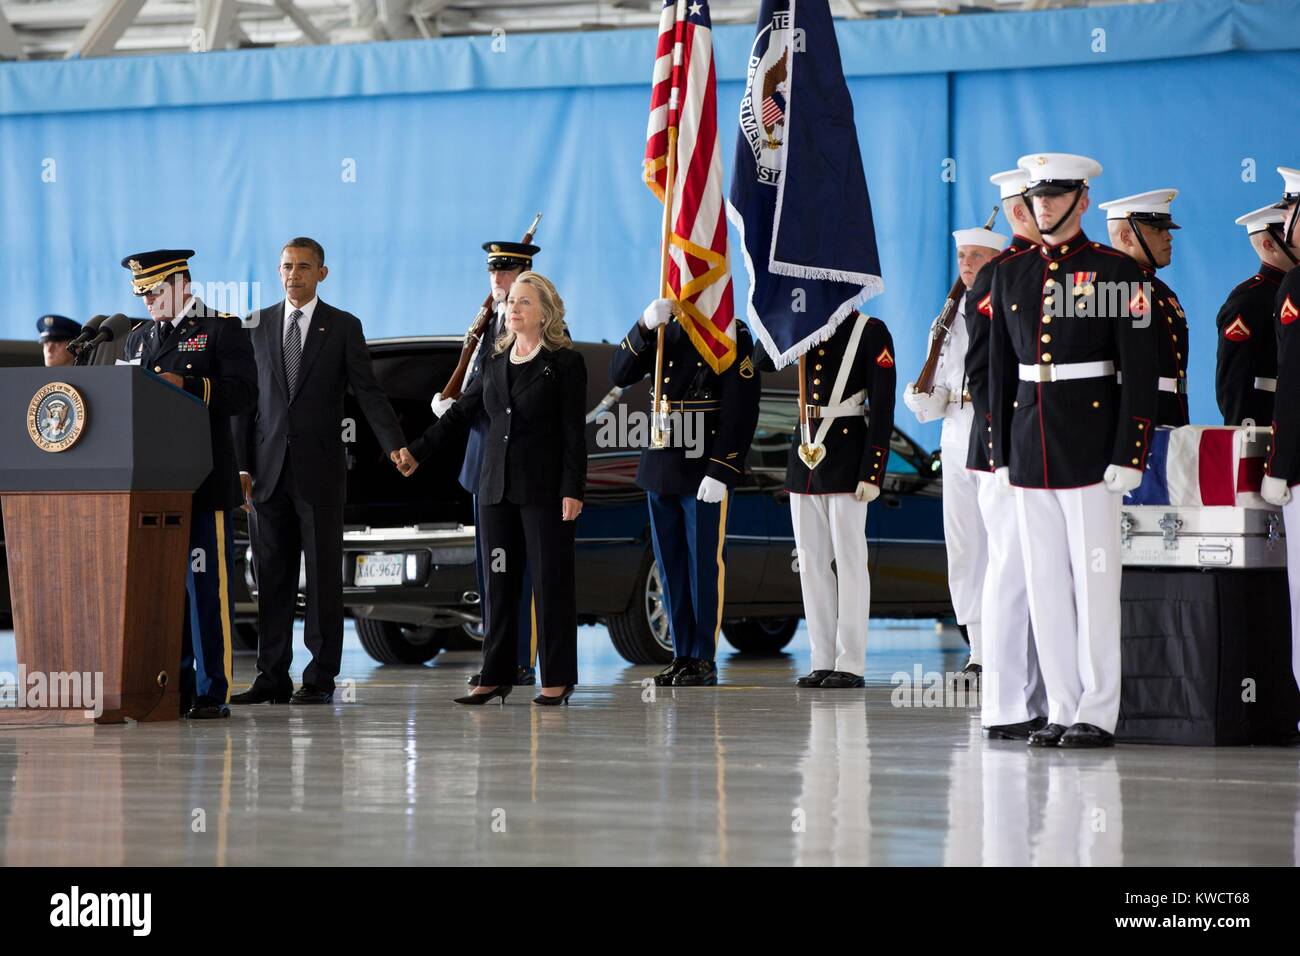 President Barack Obama hold hands with Sec. of State Hillary Rodham Clinton at Andrews Field, MD. On Sept. 14, 2012 they witnessed the transfer of remains ceremony of four Americans: J. Christopher Stevens, U.S. Ambassador to Libya; Sean Smith, Information Management Officer; and Security Personnel Glen Doherty and Tyrone Woods. All were killed in the attack on the U.S. Consulate in Benghazi, Libya. (BSLOC 2015 3 70) Stock Photo